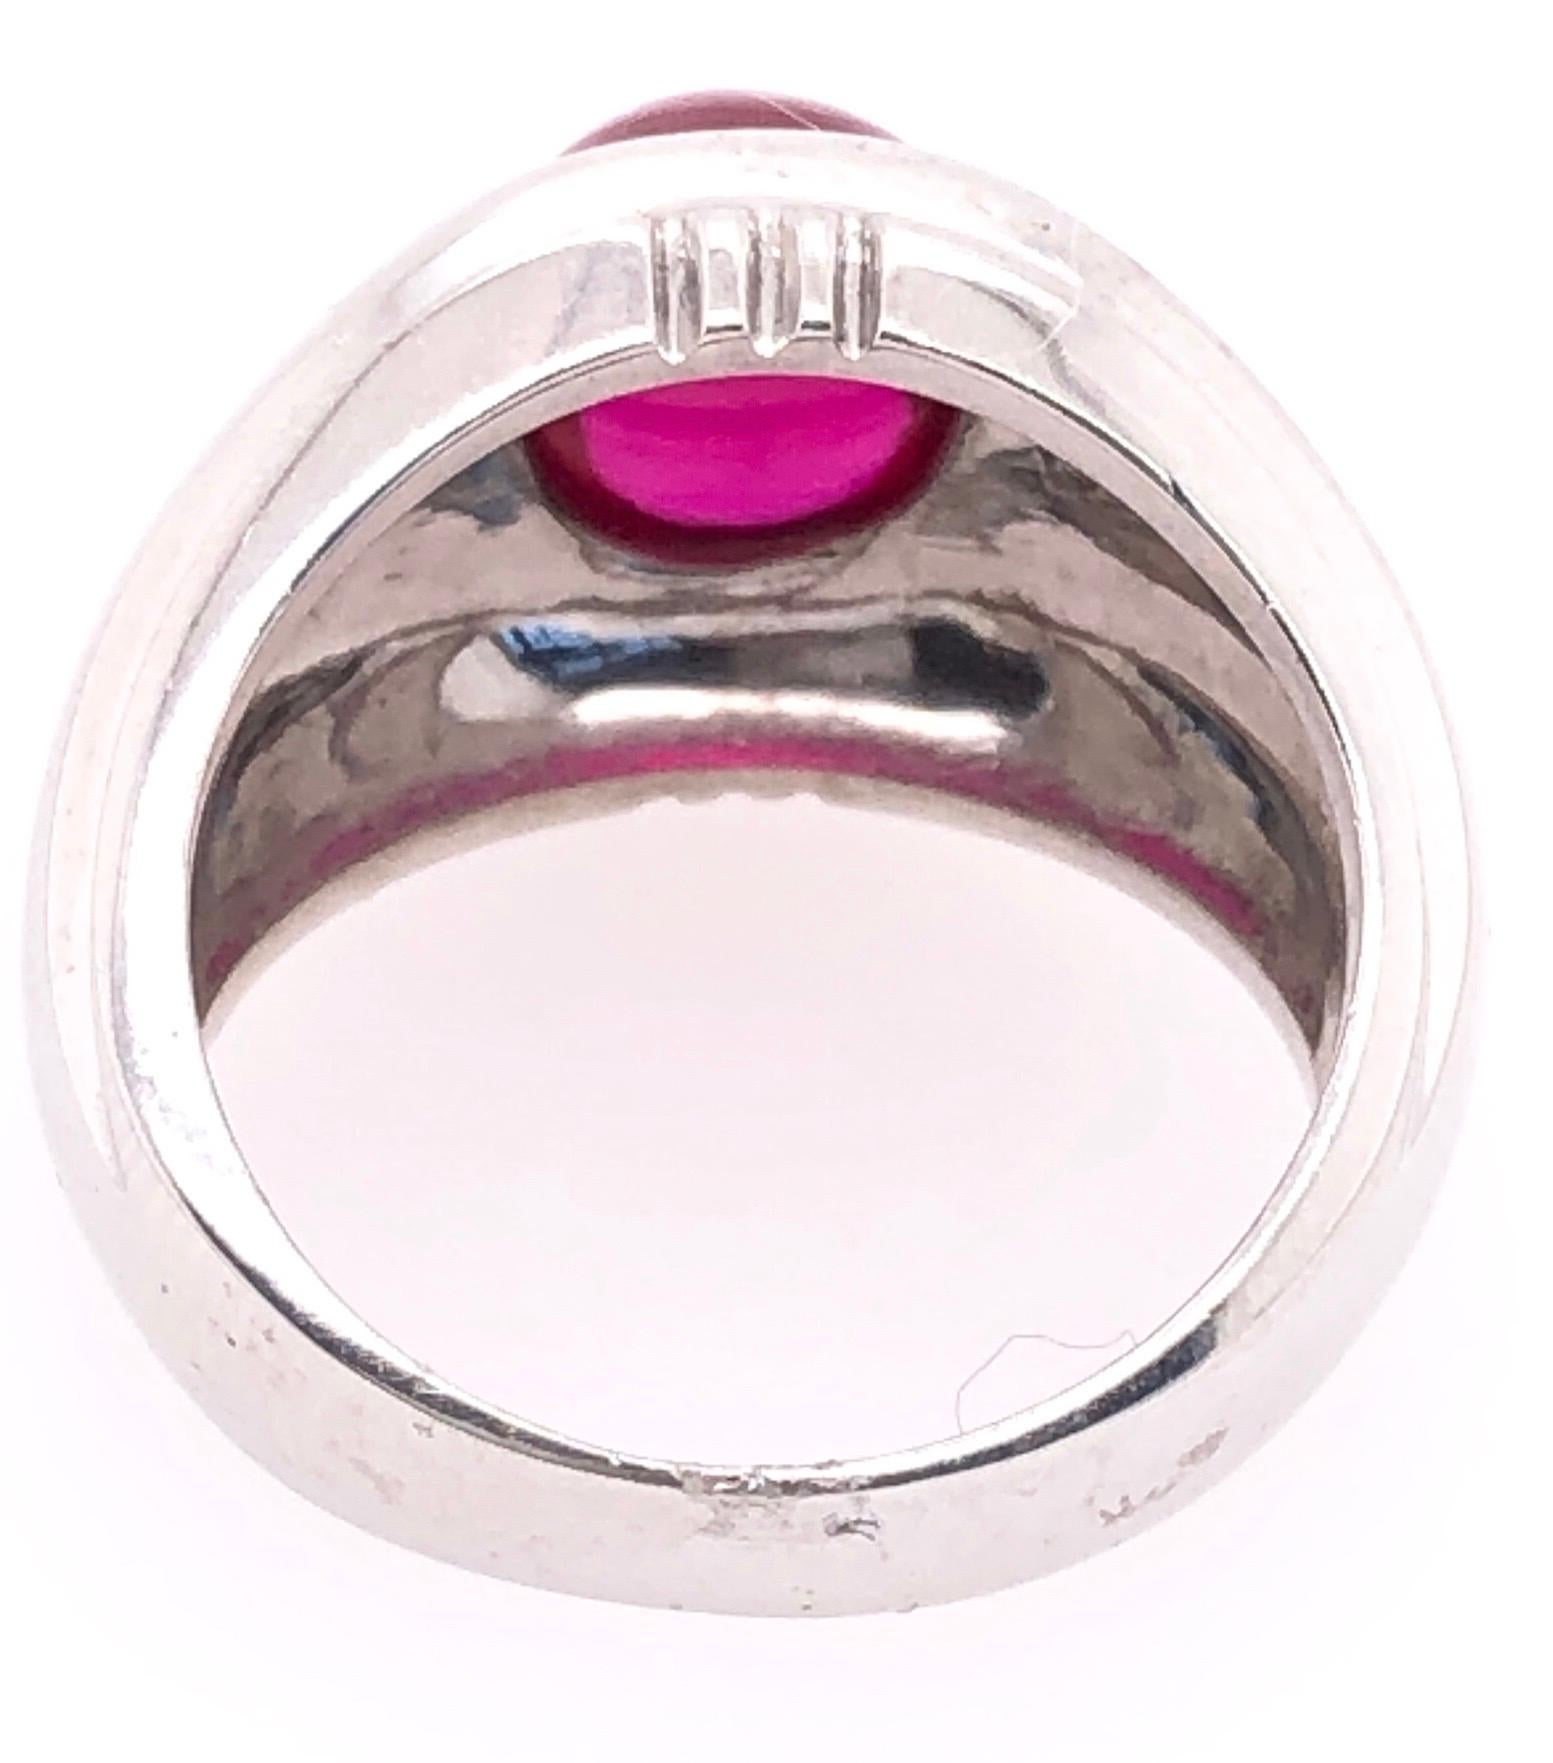 14 Karat White Gold Dome Ring With Garnet Cabochon And Diamond Accents
0.25 total diamond weight.
Size 6.25
11.95 grams total weight.